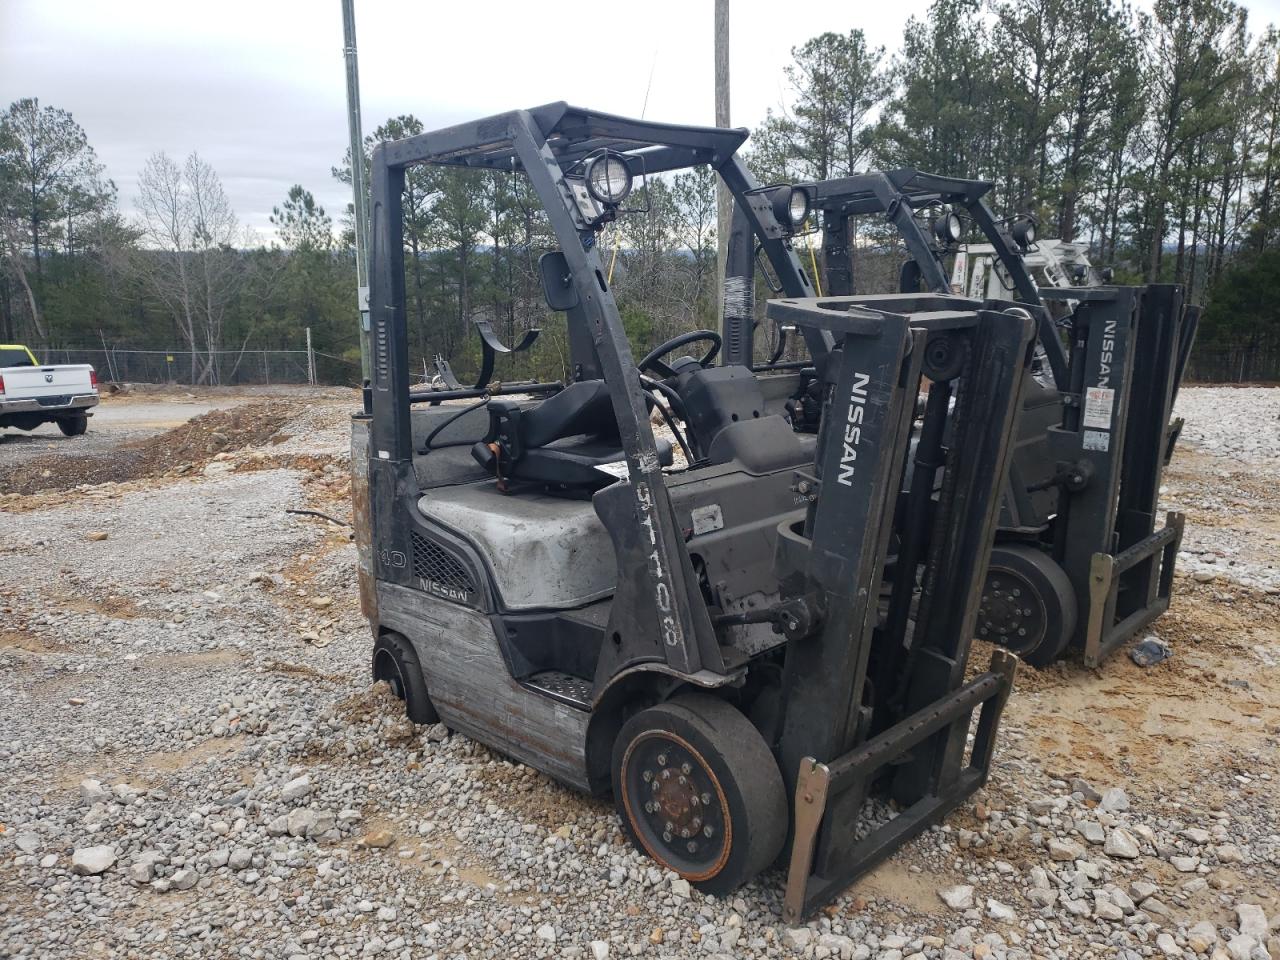 CP1F29W**** Salvage and Wrecked 2012 Nissan Forklift in AL - Hueytown